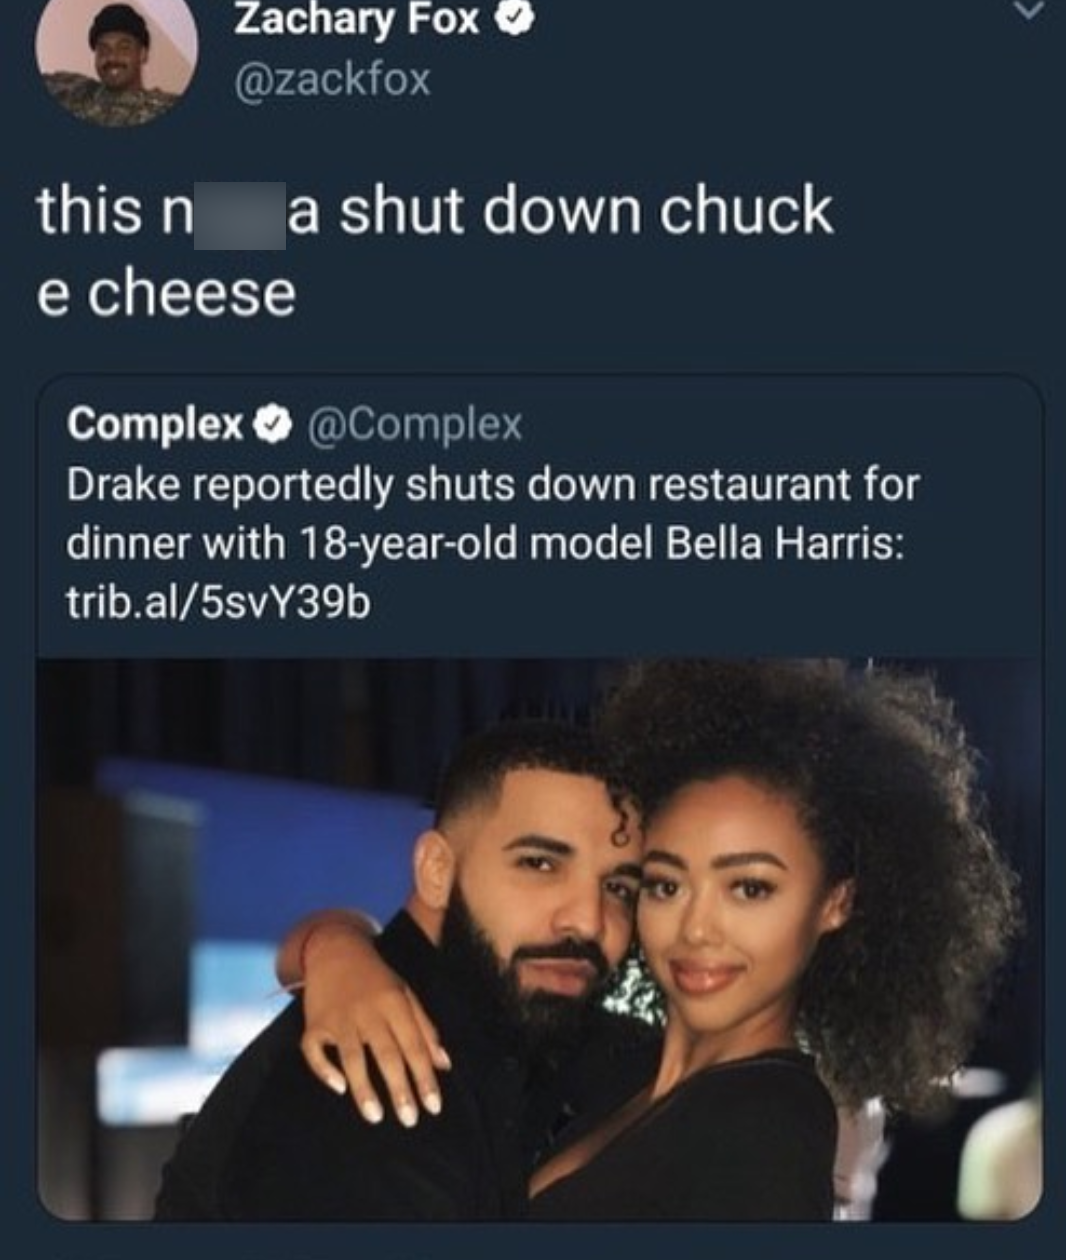 memes - drake and bella harris - Zachary Fox this n a shut down chuck e cheese Complex Drake reportedly shuts down restaurant for dinner with 18yearold model Bella Harris trib.al5svY39b